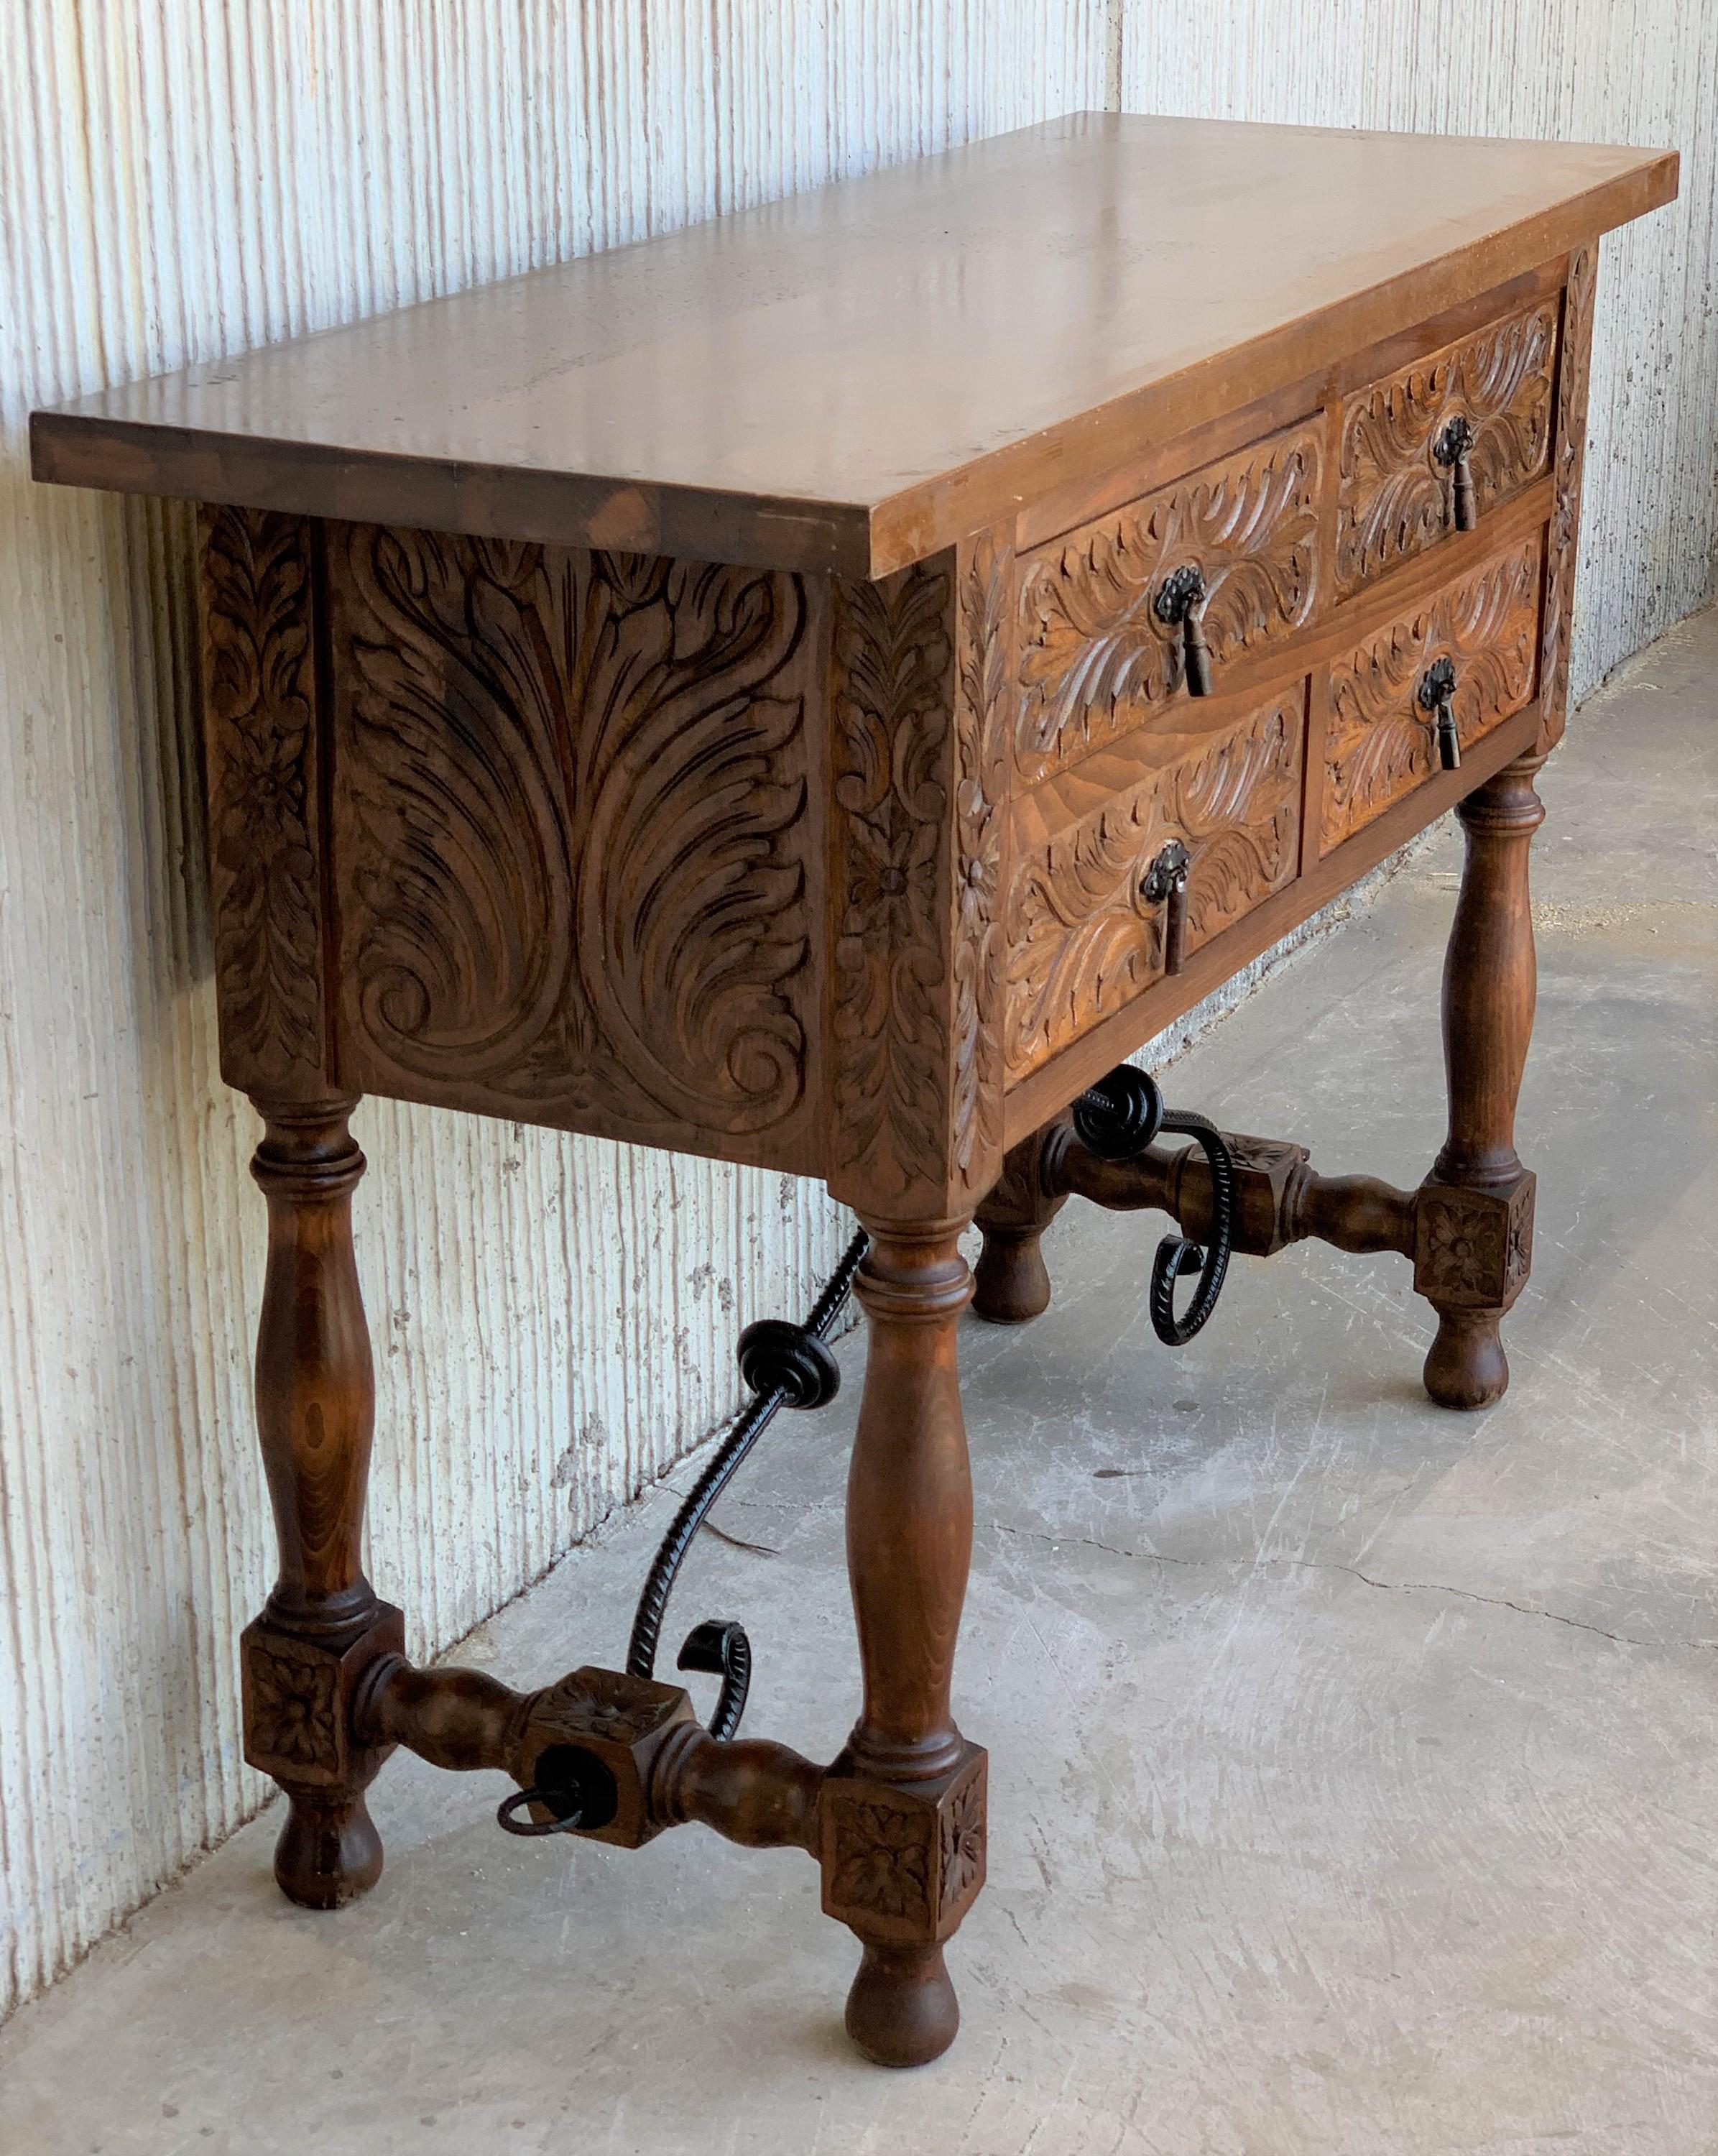 Baroque Revival Catalan Spanish Carved Walnut Console Sofa Table, Four Drawers & Iron Stretcher